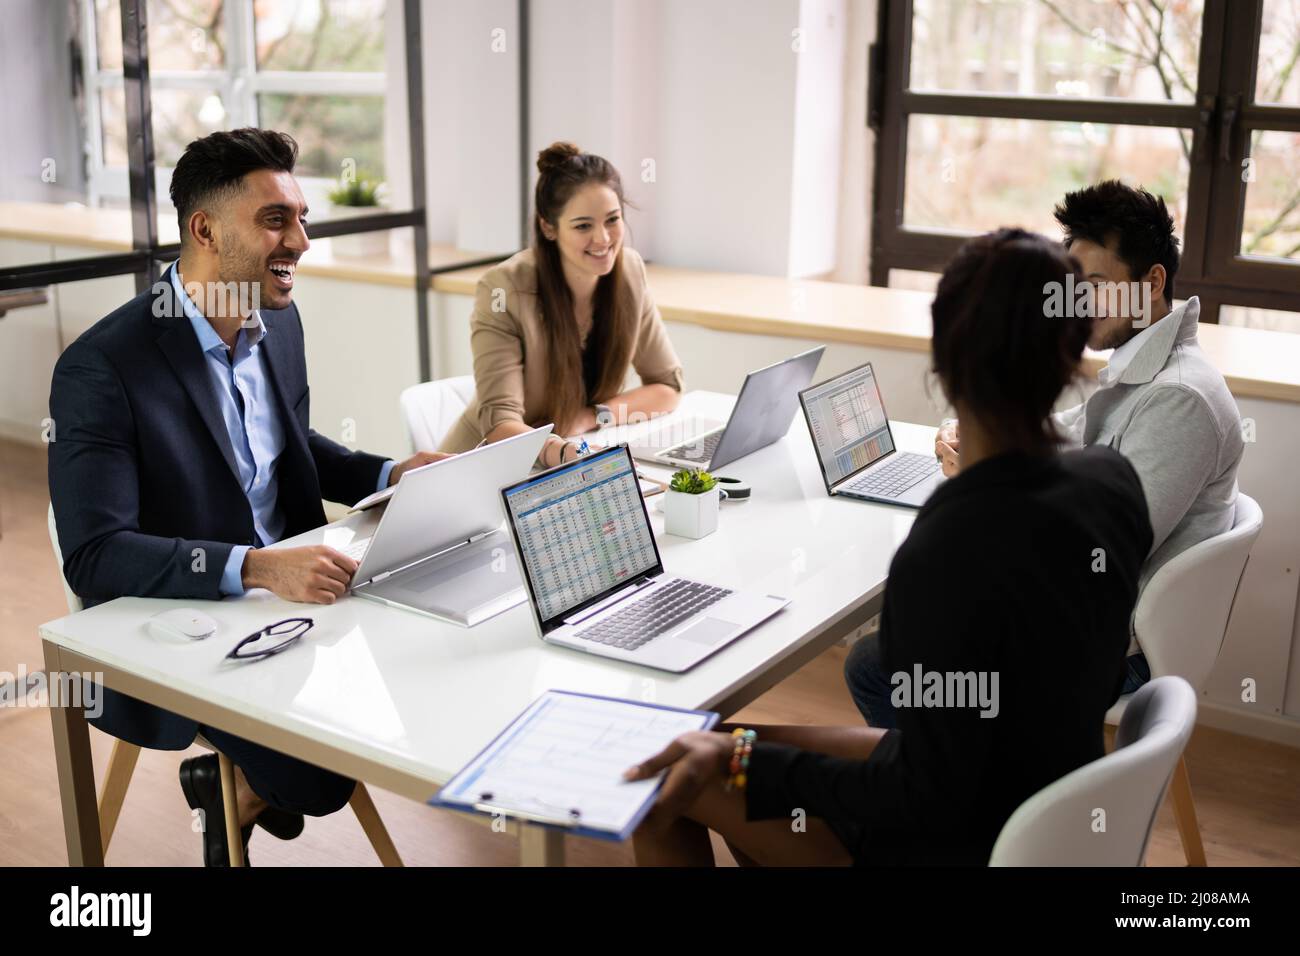 Diverse Business People Group At Workplace. Staff Meeting Stock Photo